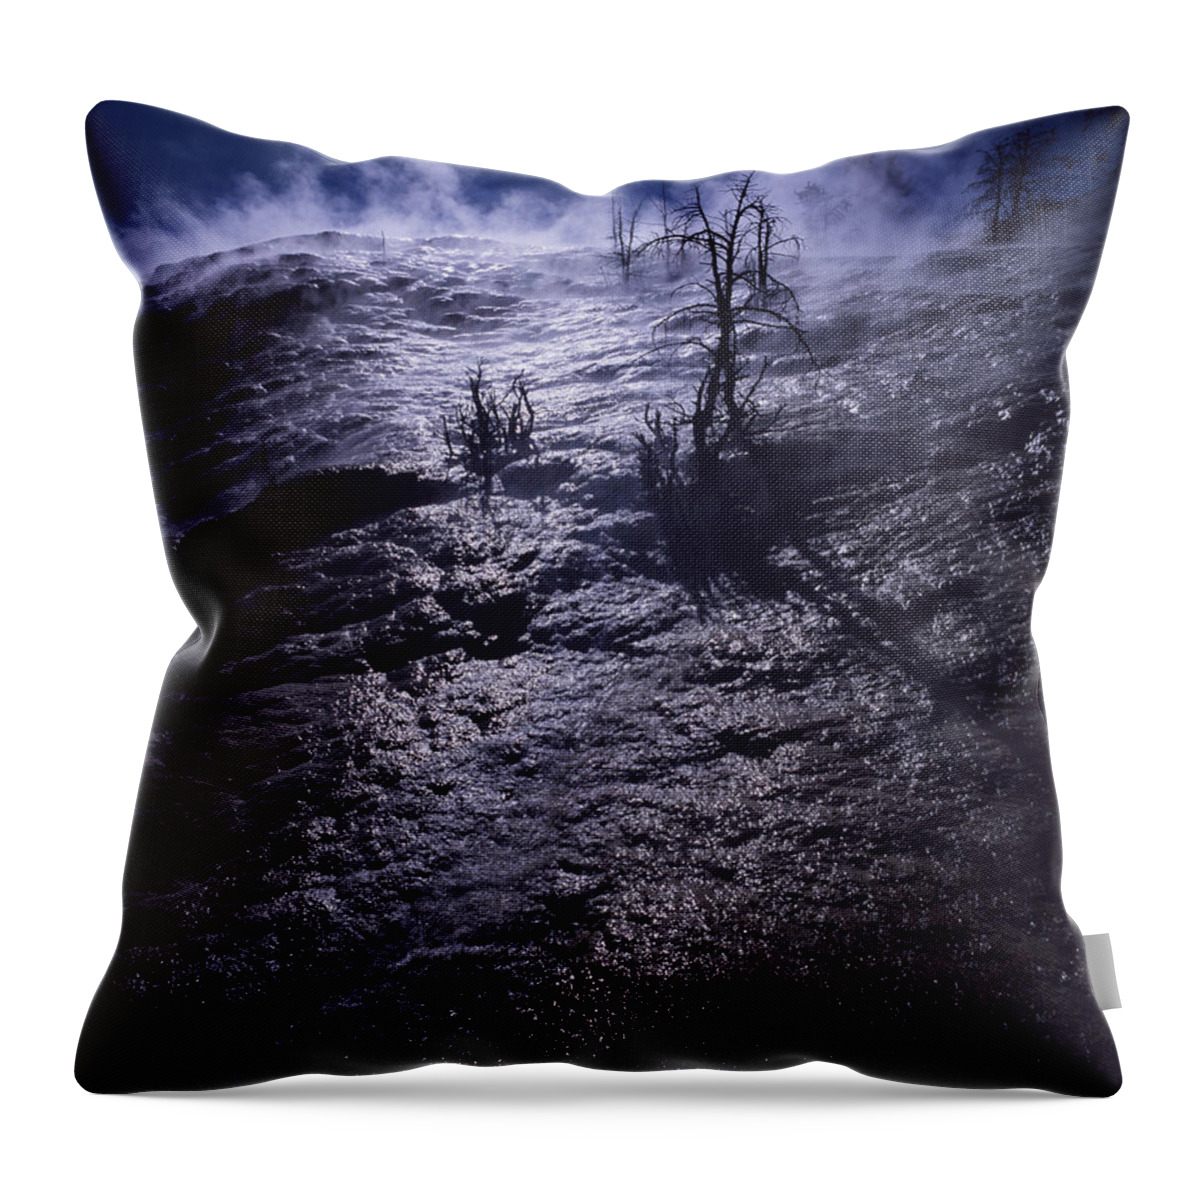 Steam Throw Pillow featuring the photograph Mammoth Steam by J L Woody Wooden